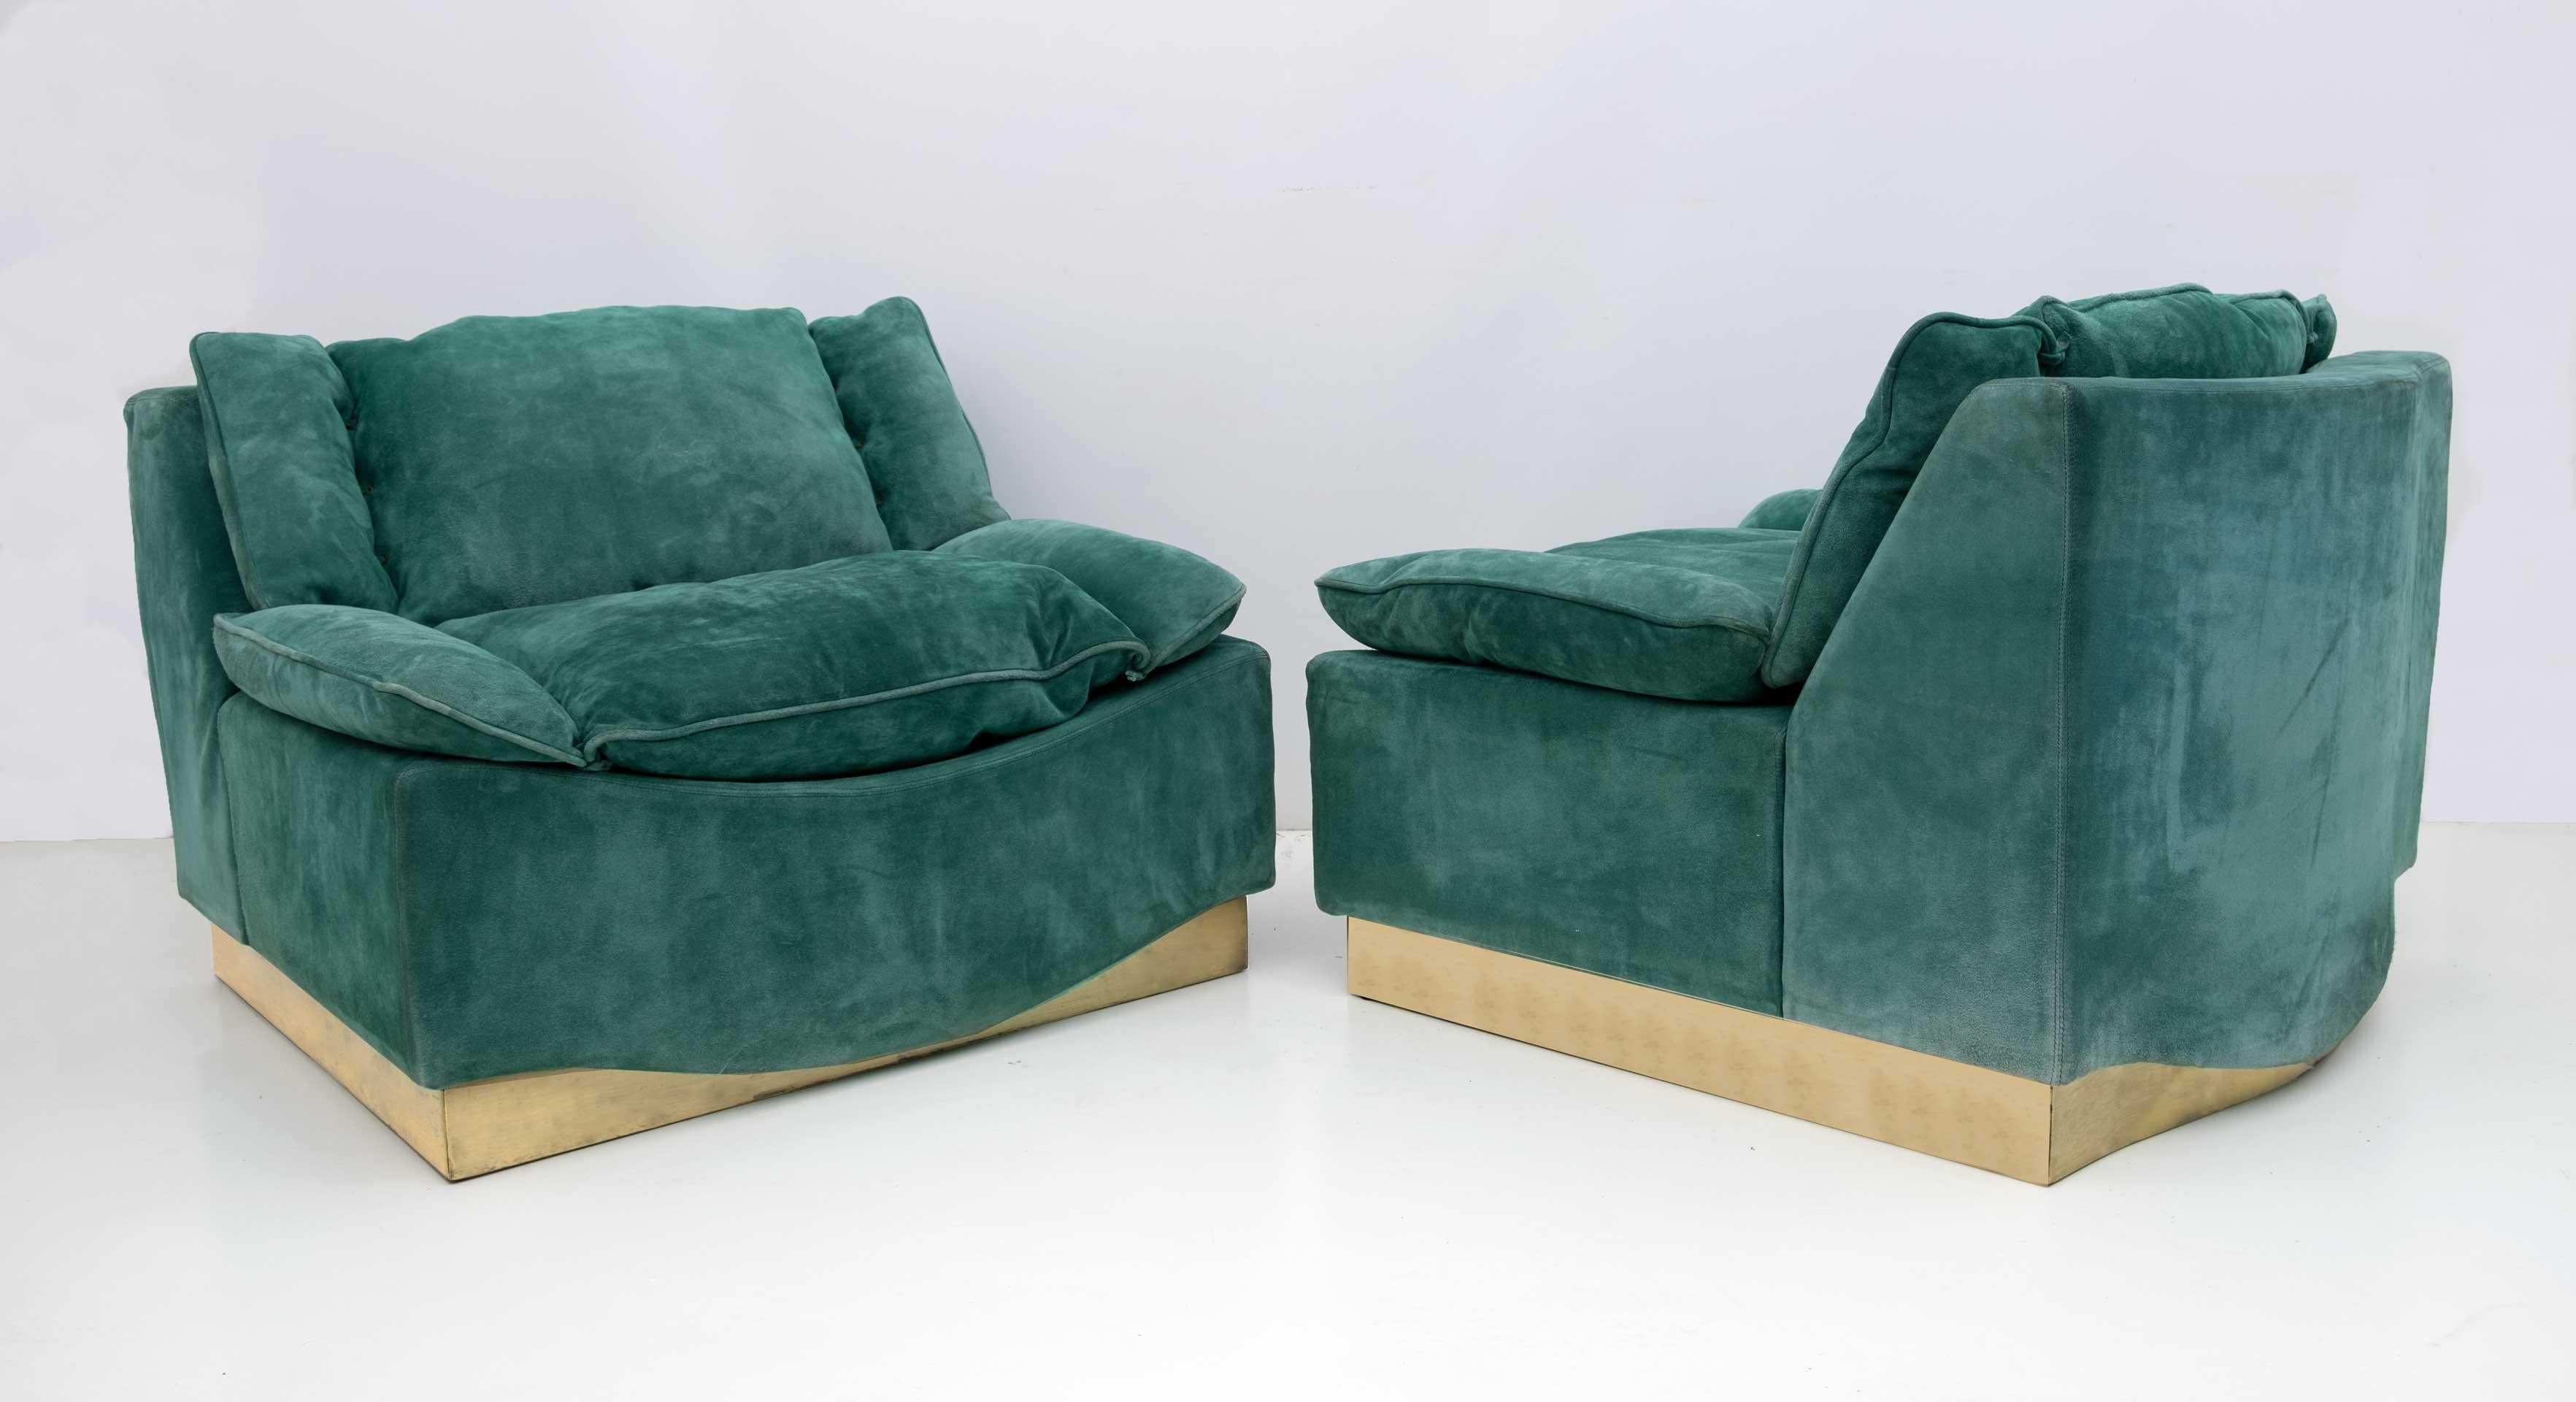 Superb and very rare set of 2 armchairs and footstool designed by Luciano Frigerio and produced by Frigerio Desio in the 70s. The conditions are excellent, as shown in the photos, the armchairs are upholstered in green suede leather. The peculiarity